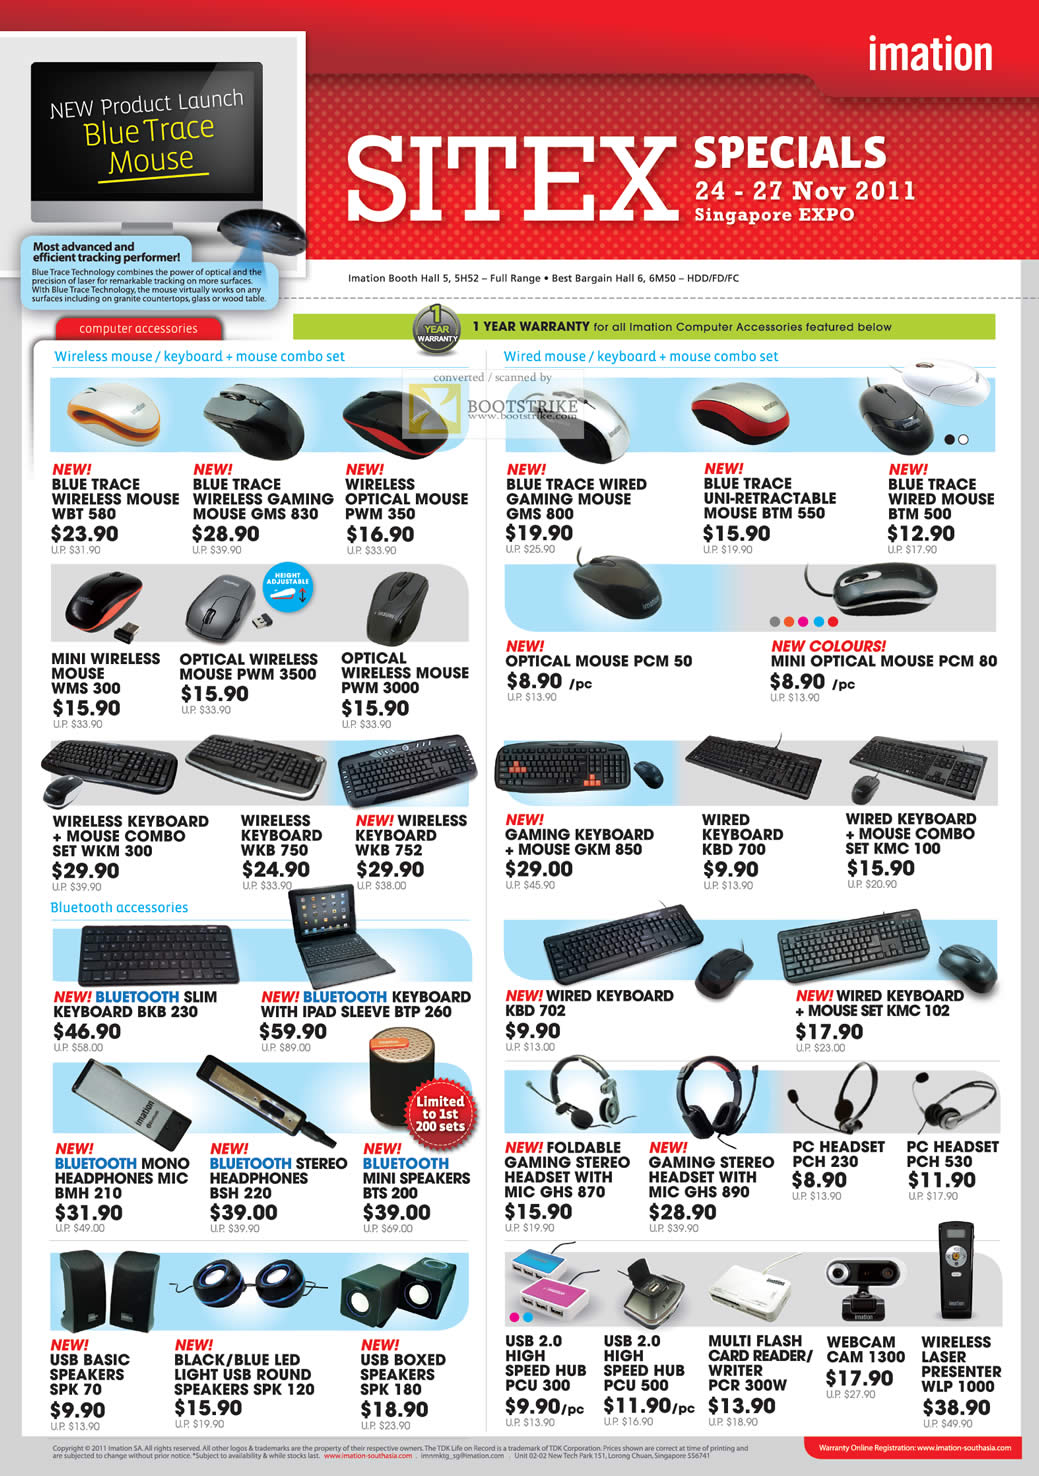 SITEX 2011 price list image brochure of Imation Accessories Wireless Mouse, Keyboard, Wired Mouse, Blue Trace WBT, GMS, Bluetooth, Speakers, Headphones, Mic, Headset, USB Hub, Laser Presenter